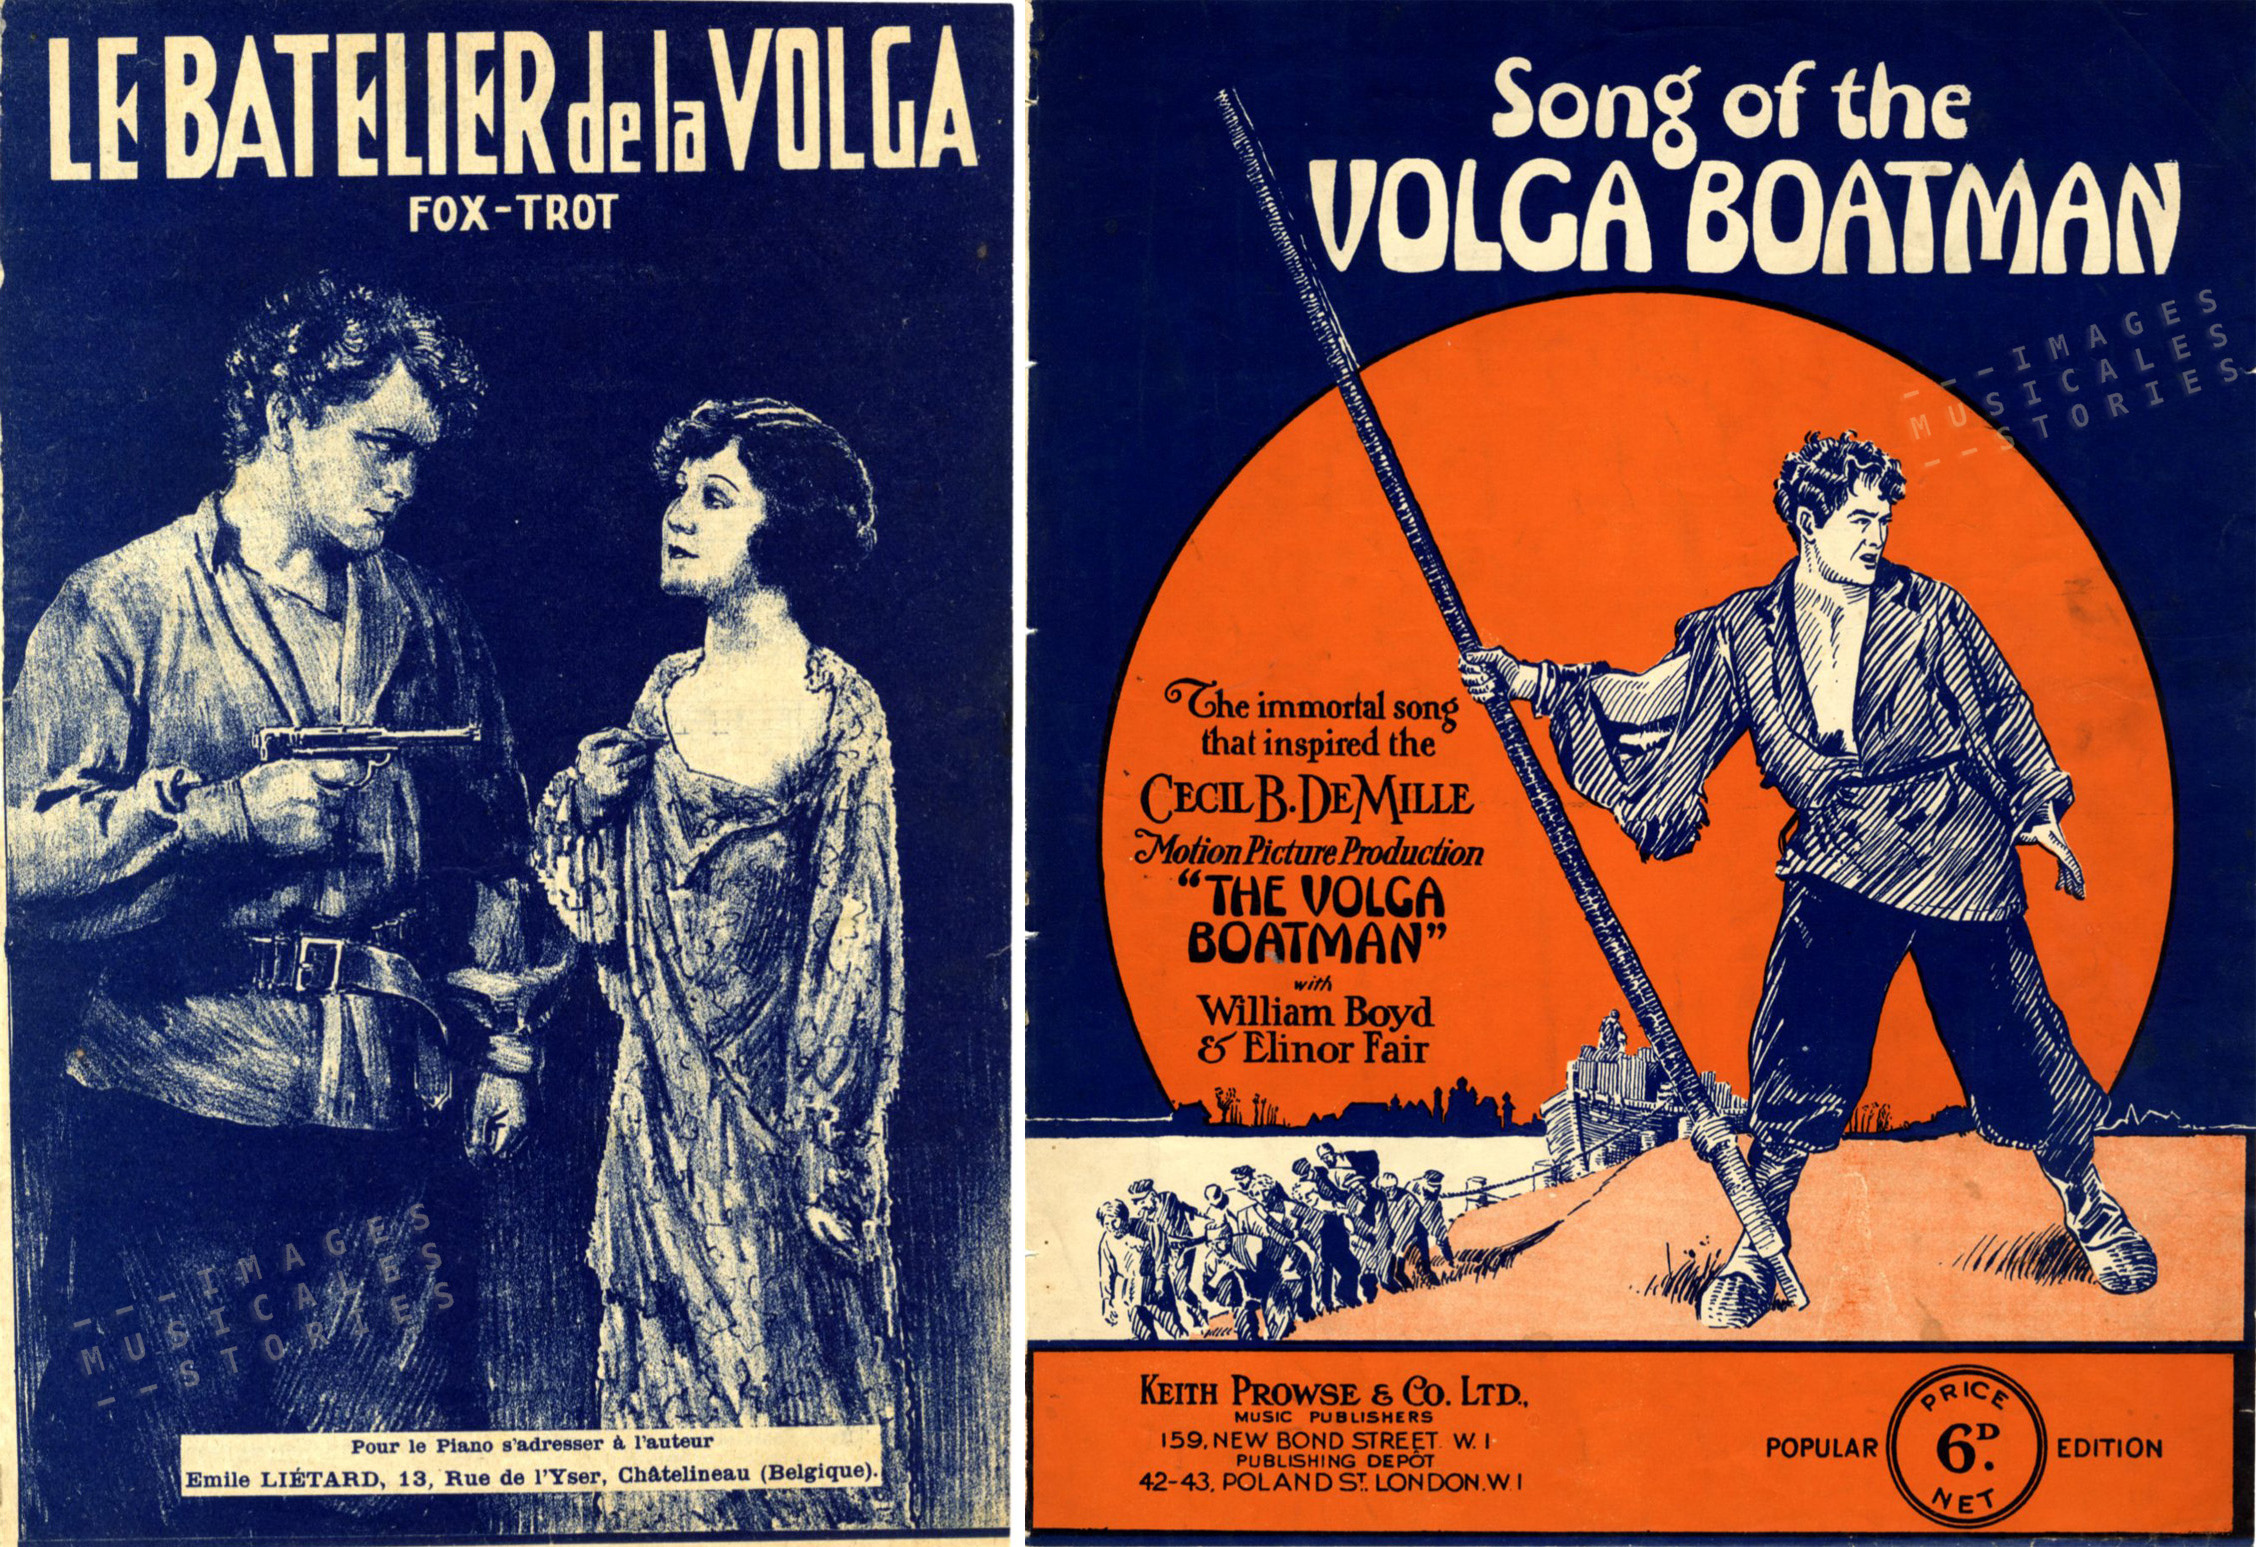 Two sheet music covers. Left: 'Le Batelier de la Volga' by Emile Liétard (Châtelineau, s.d.), unknown illustrator. Right: 'Song of the Volga Boatman' published by Keith, Prowse &amp; Co (London, s.d.), unknown illustrator.